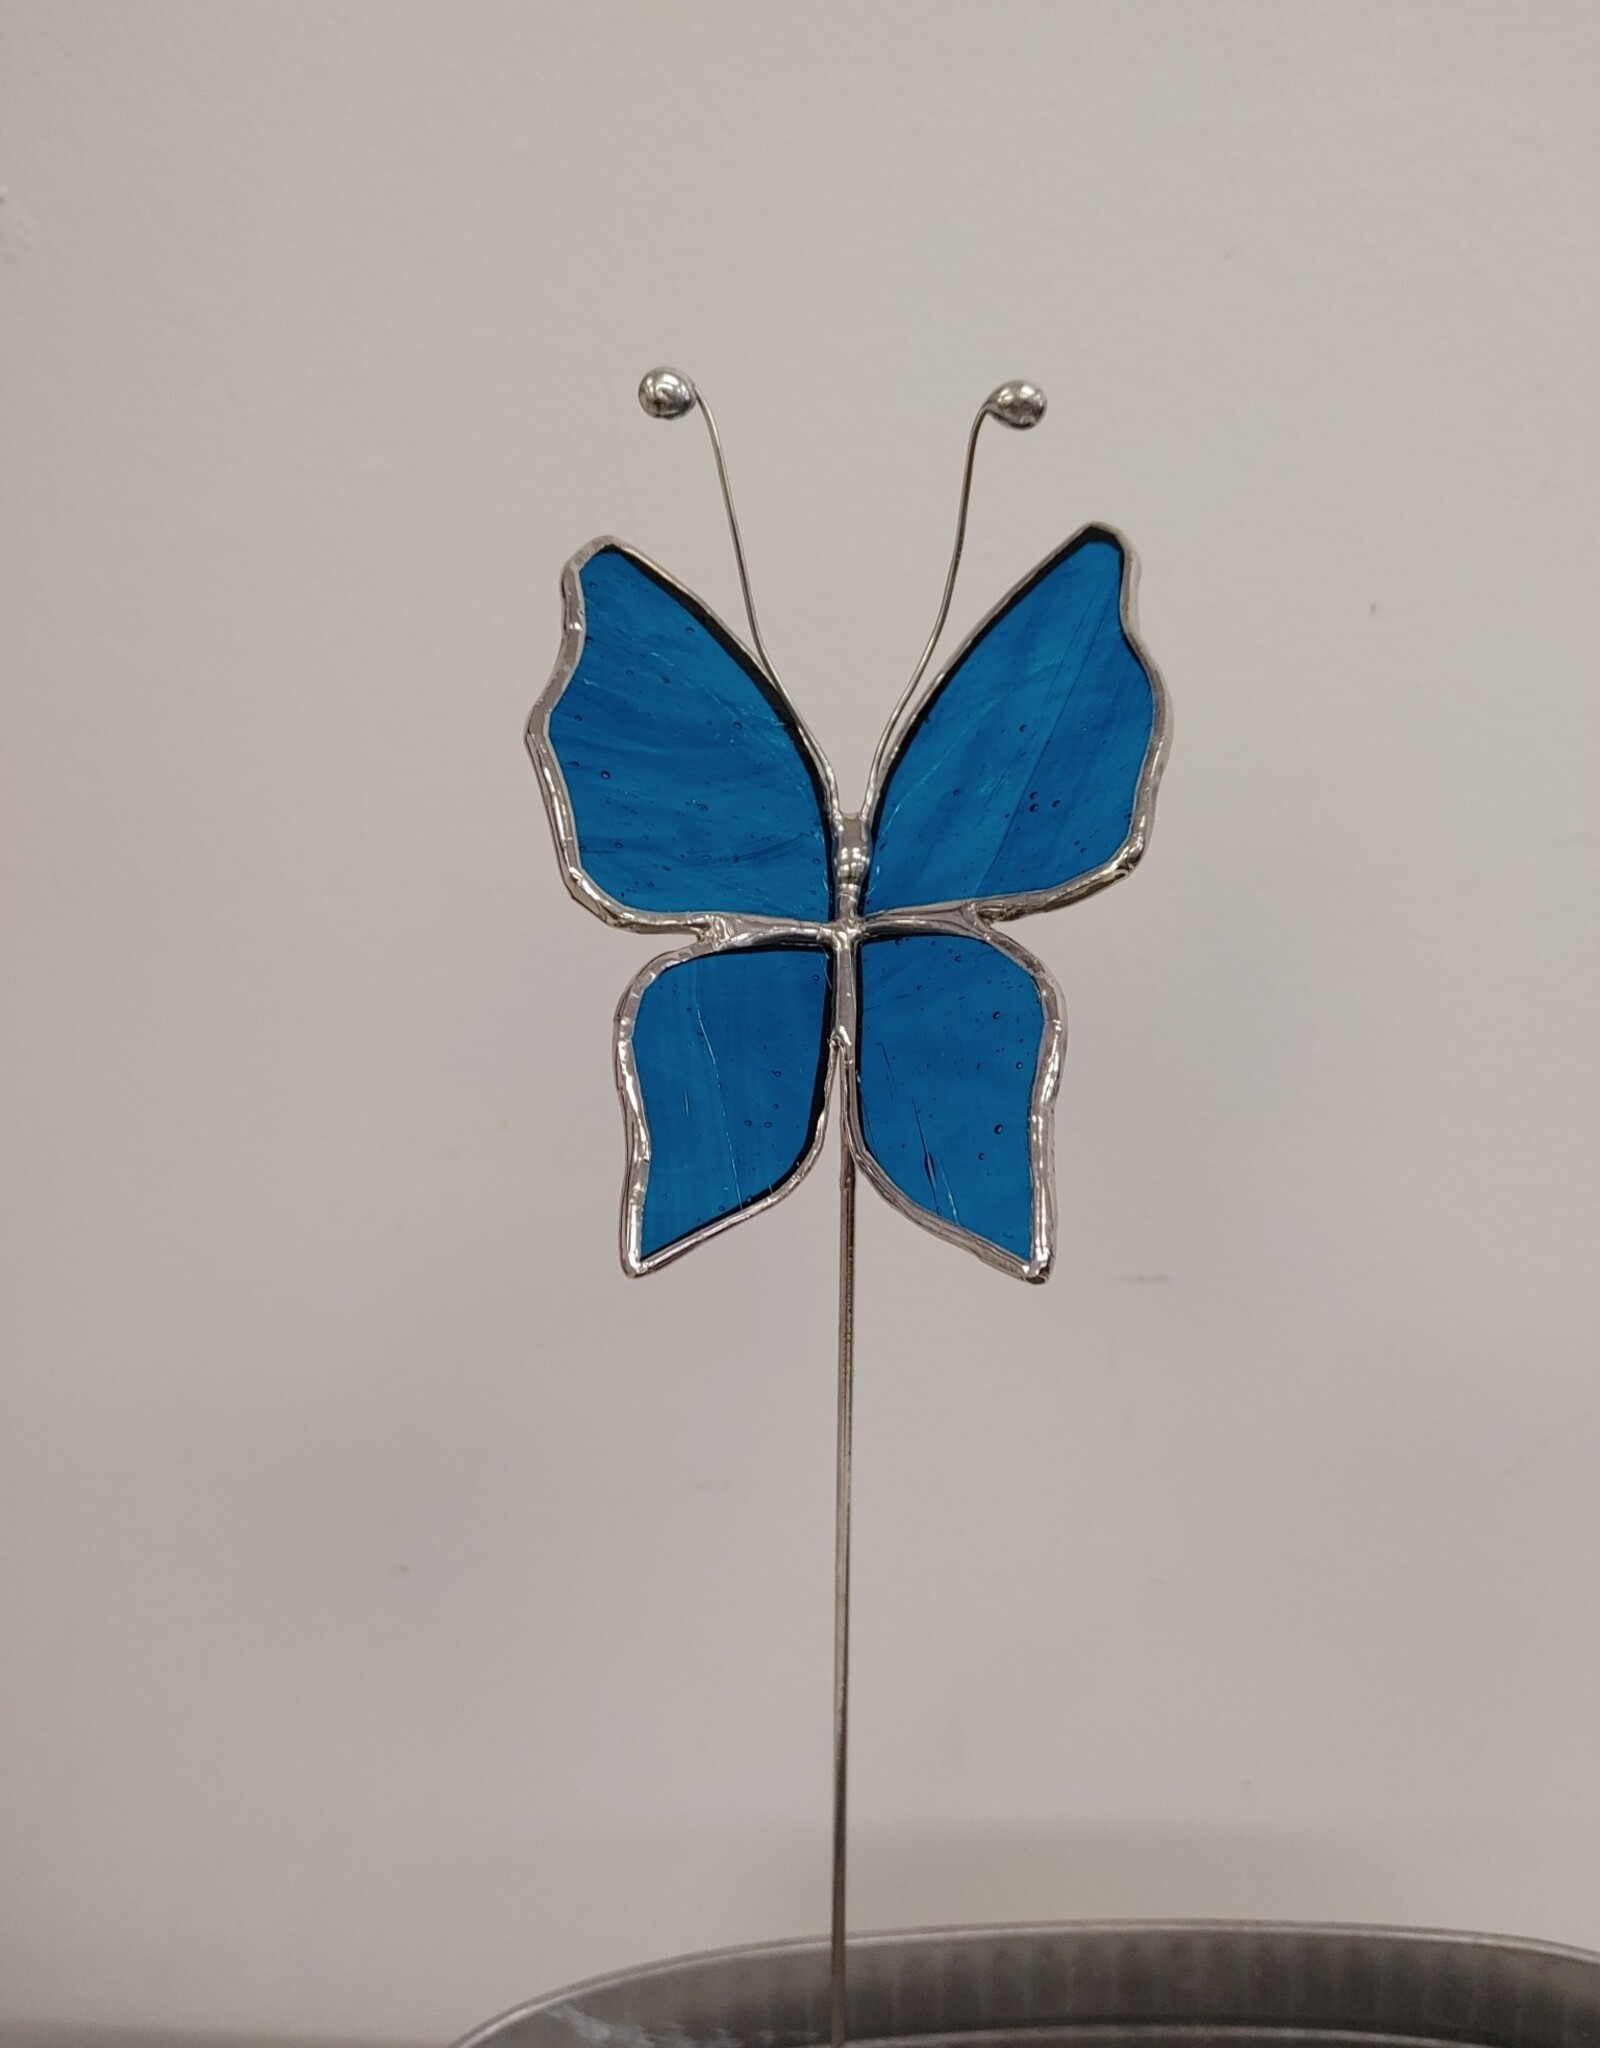 Stained Glass Butterfly Plant Stake